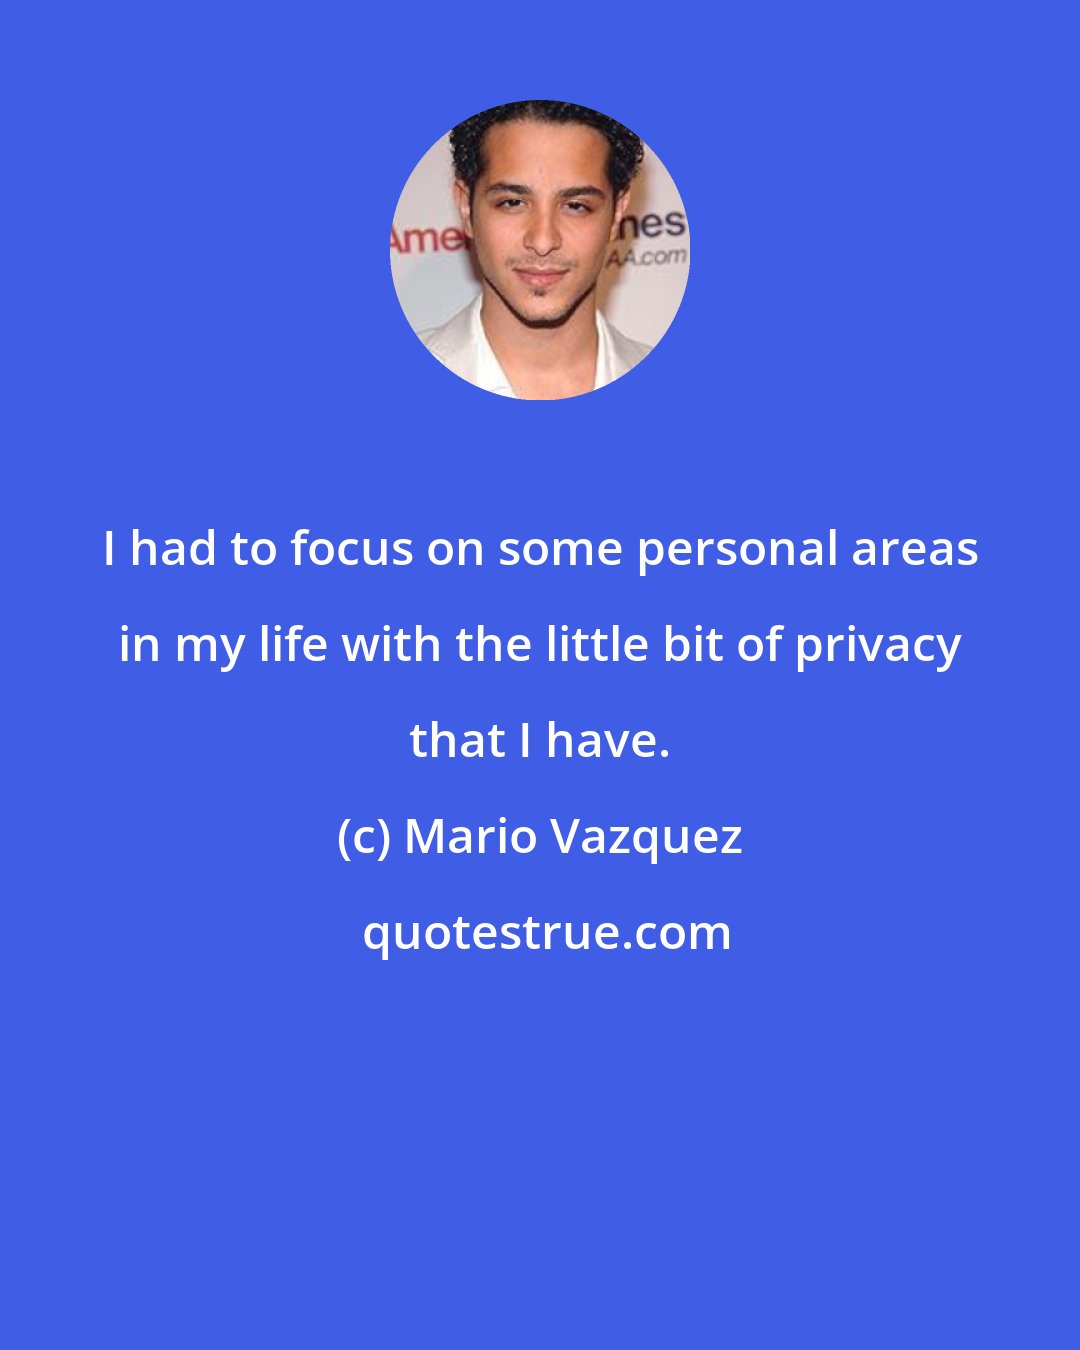 Mario Vazquez: I had to focus on some personal areas in my life with the little bit of privacy that I have.